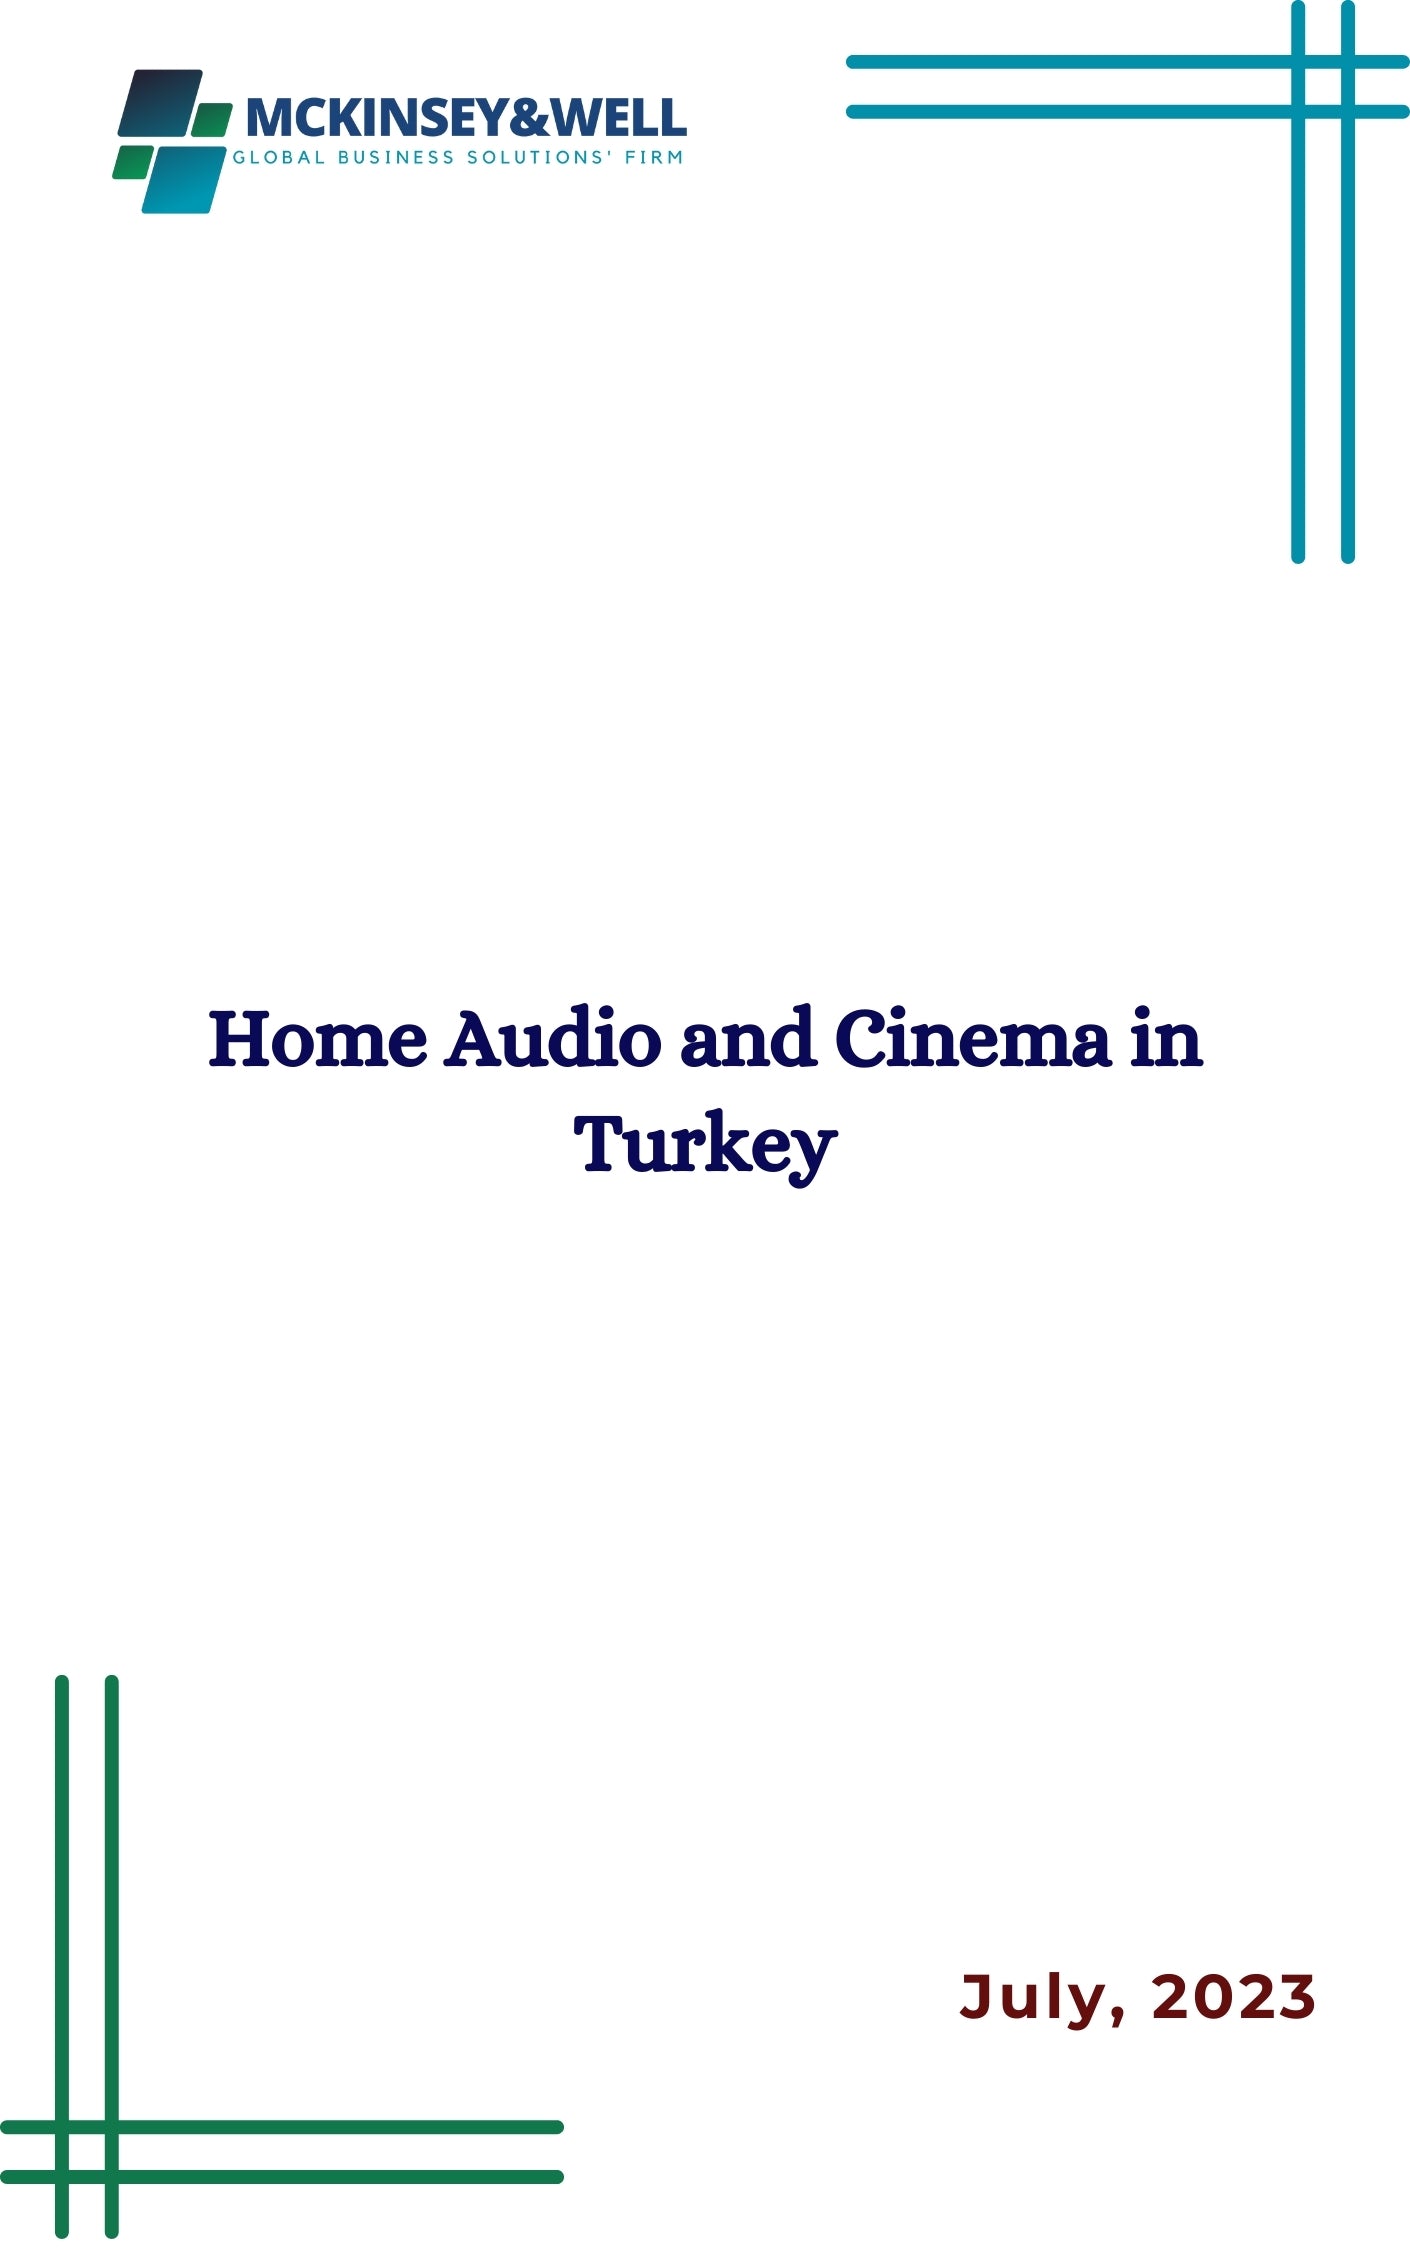 Home Audio and Cinema in Turkey